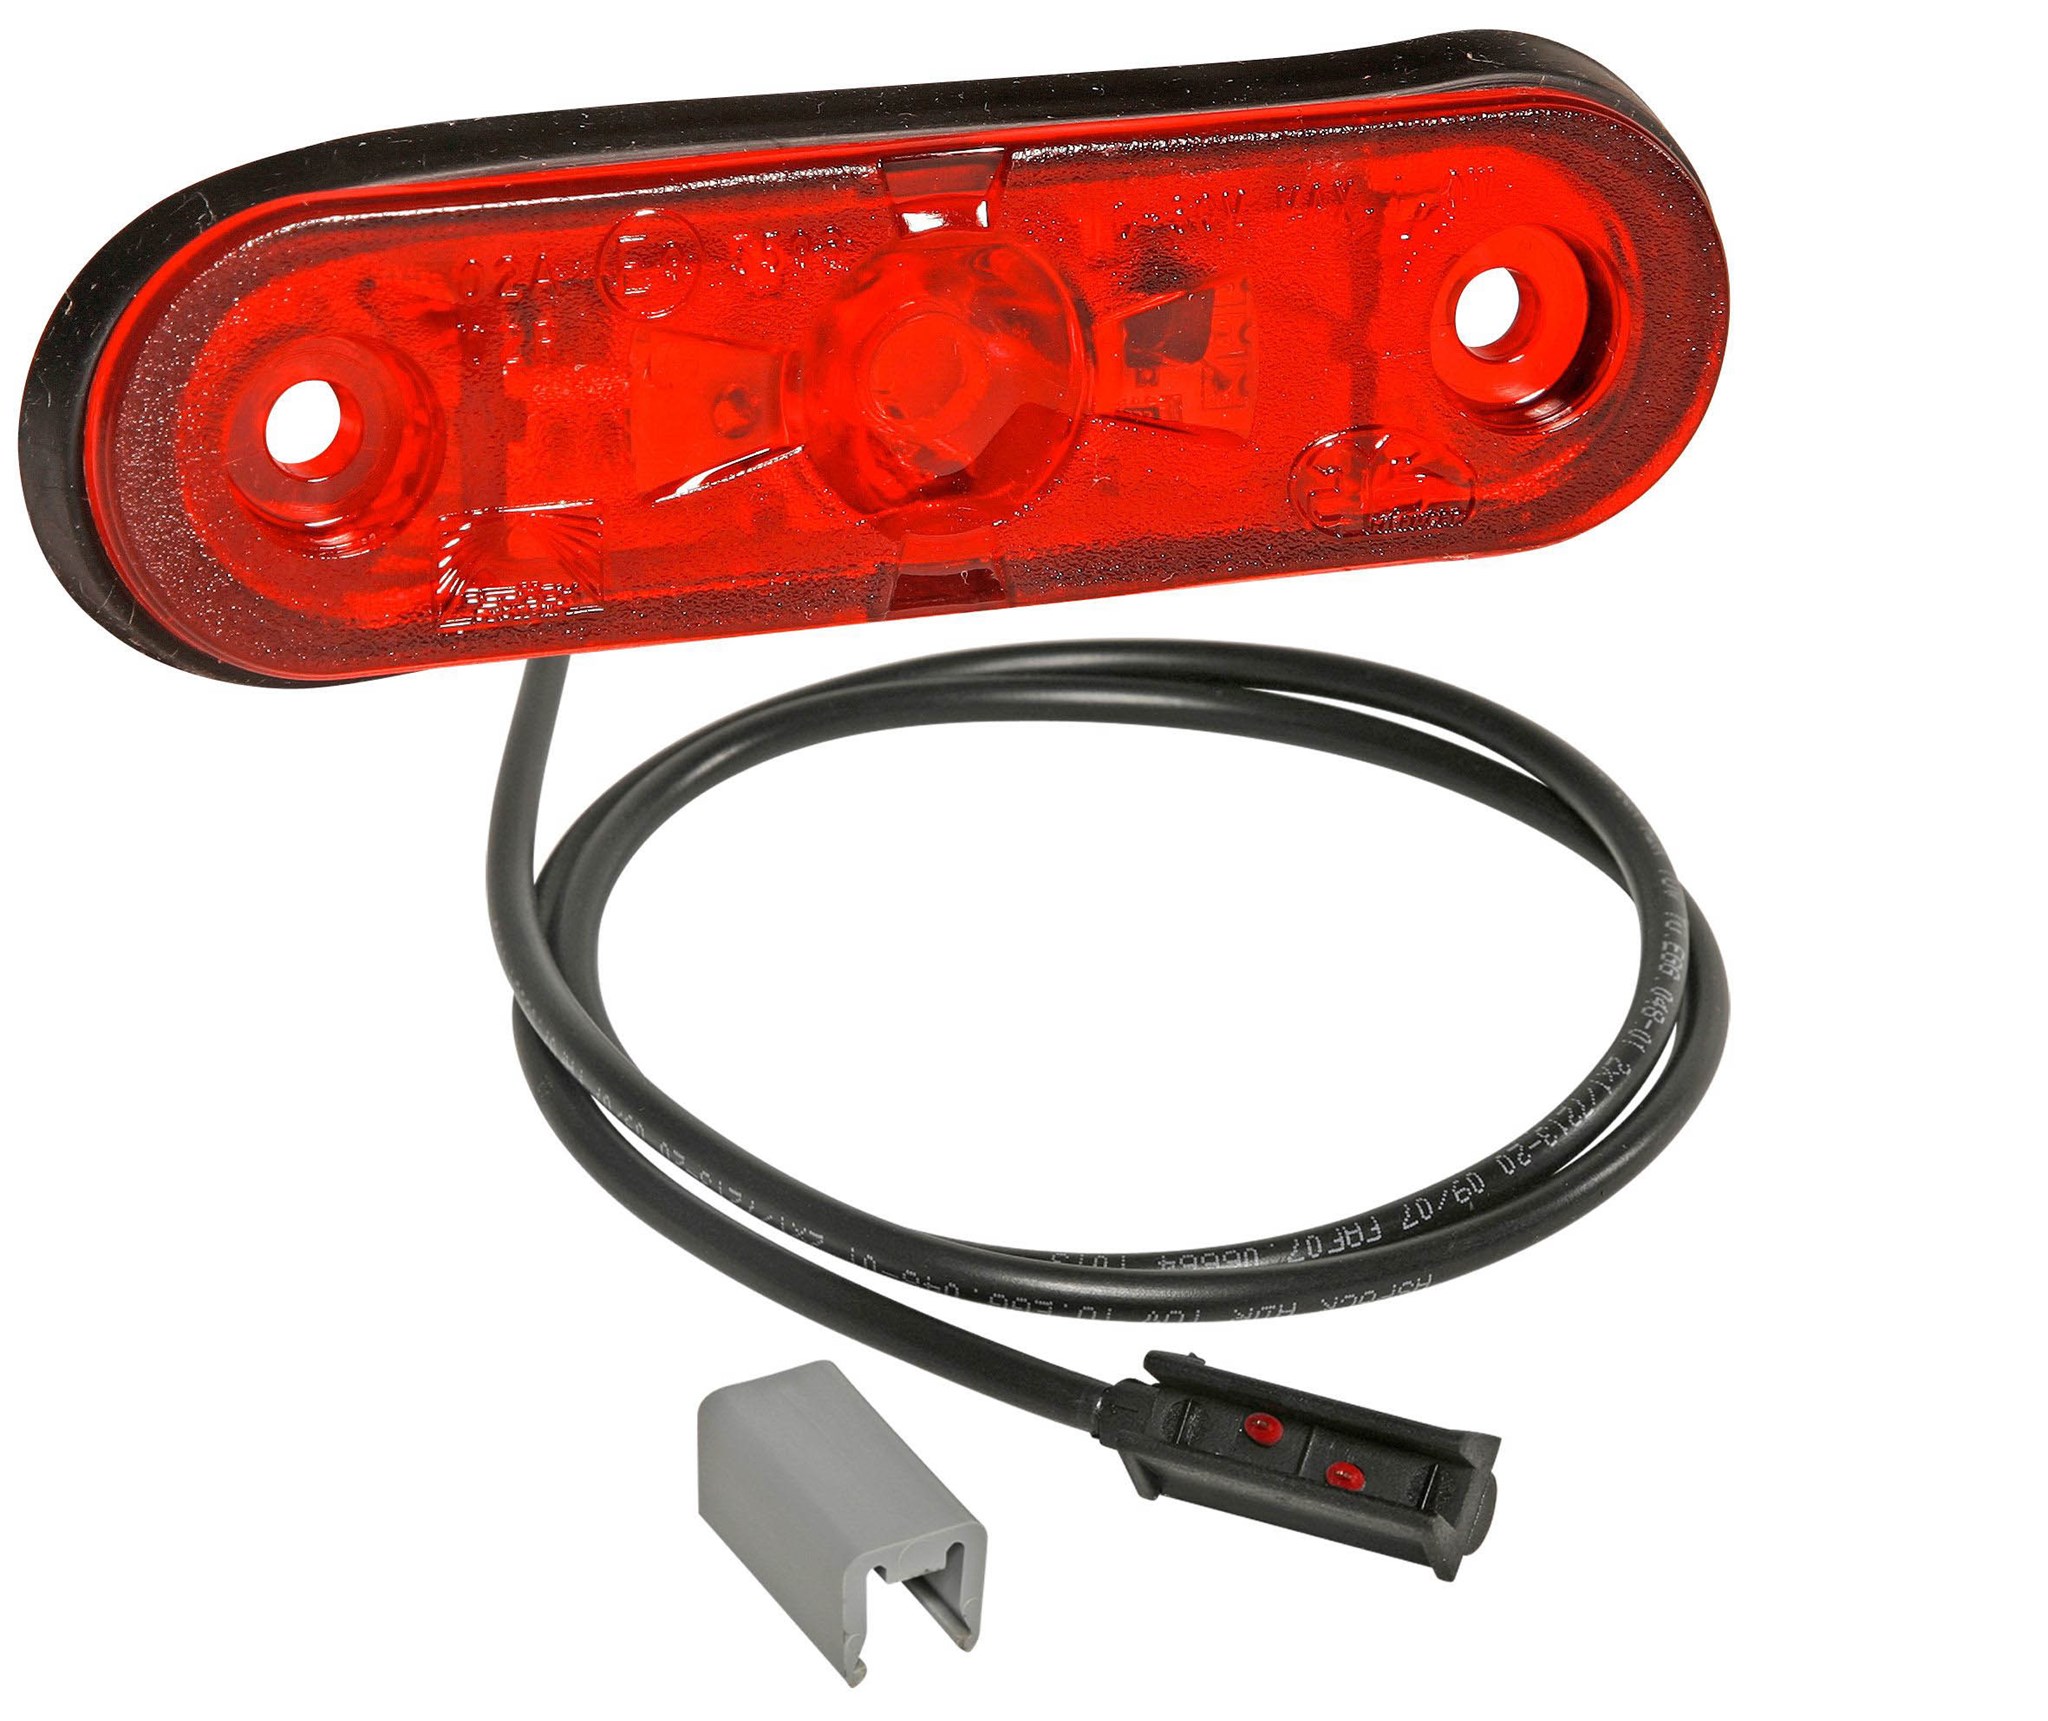 Picture of Positionleuchte 31-7204-004 Aspöck Posipoint II rot LED P&R  500mm